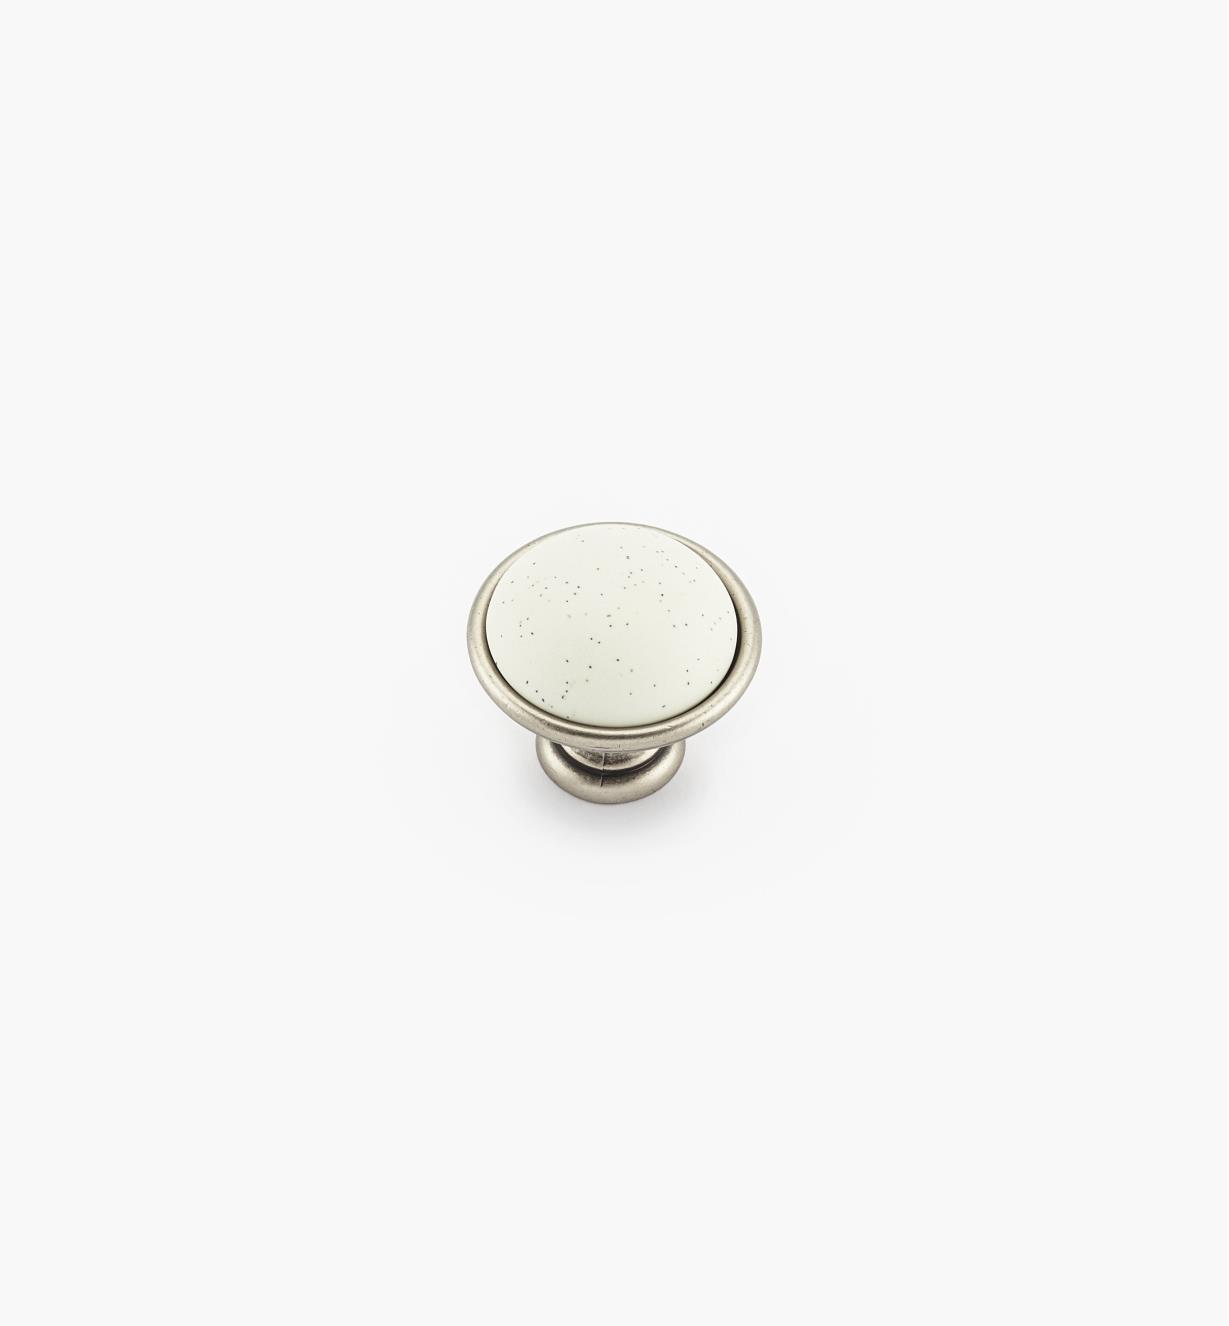 00A7766 - Bouton blanc New Deco, 38 mm